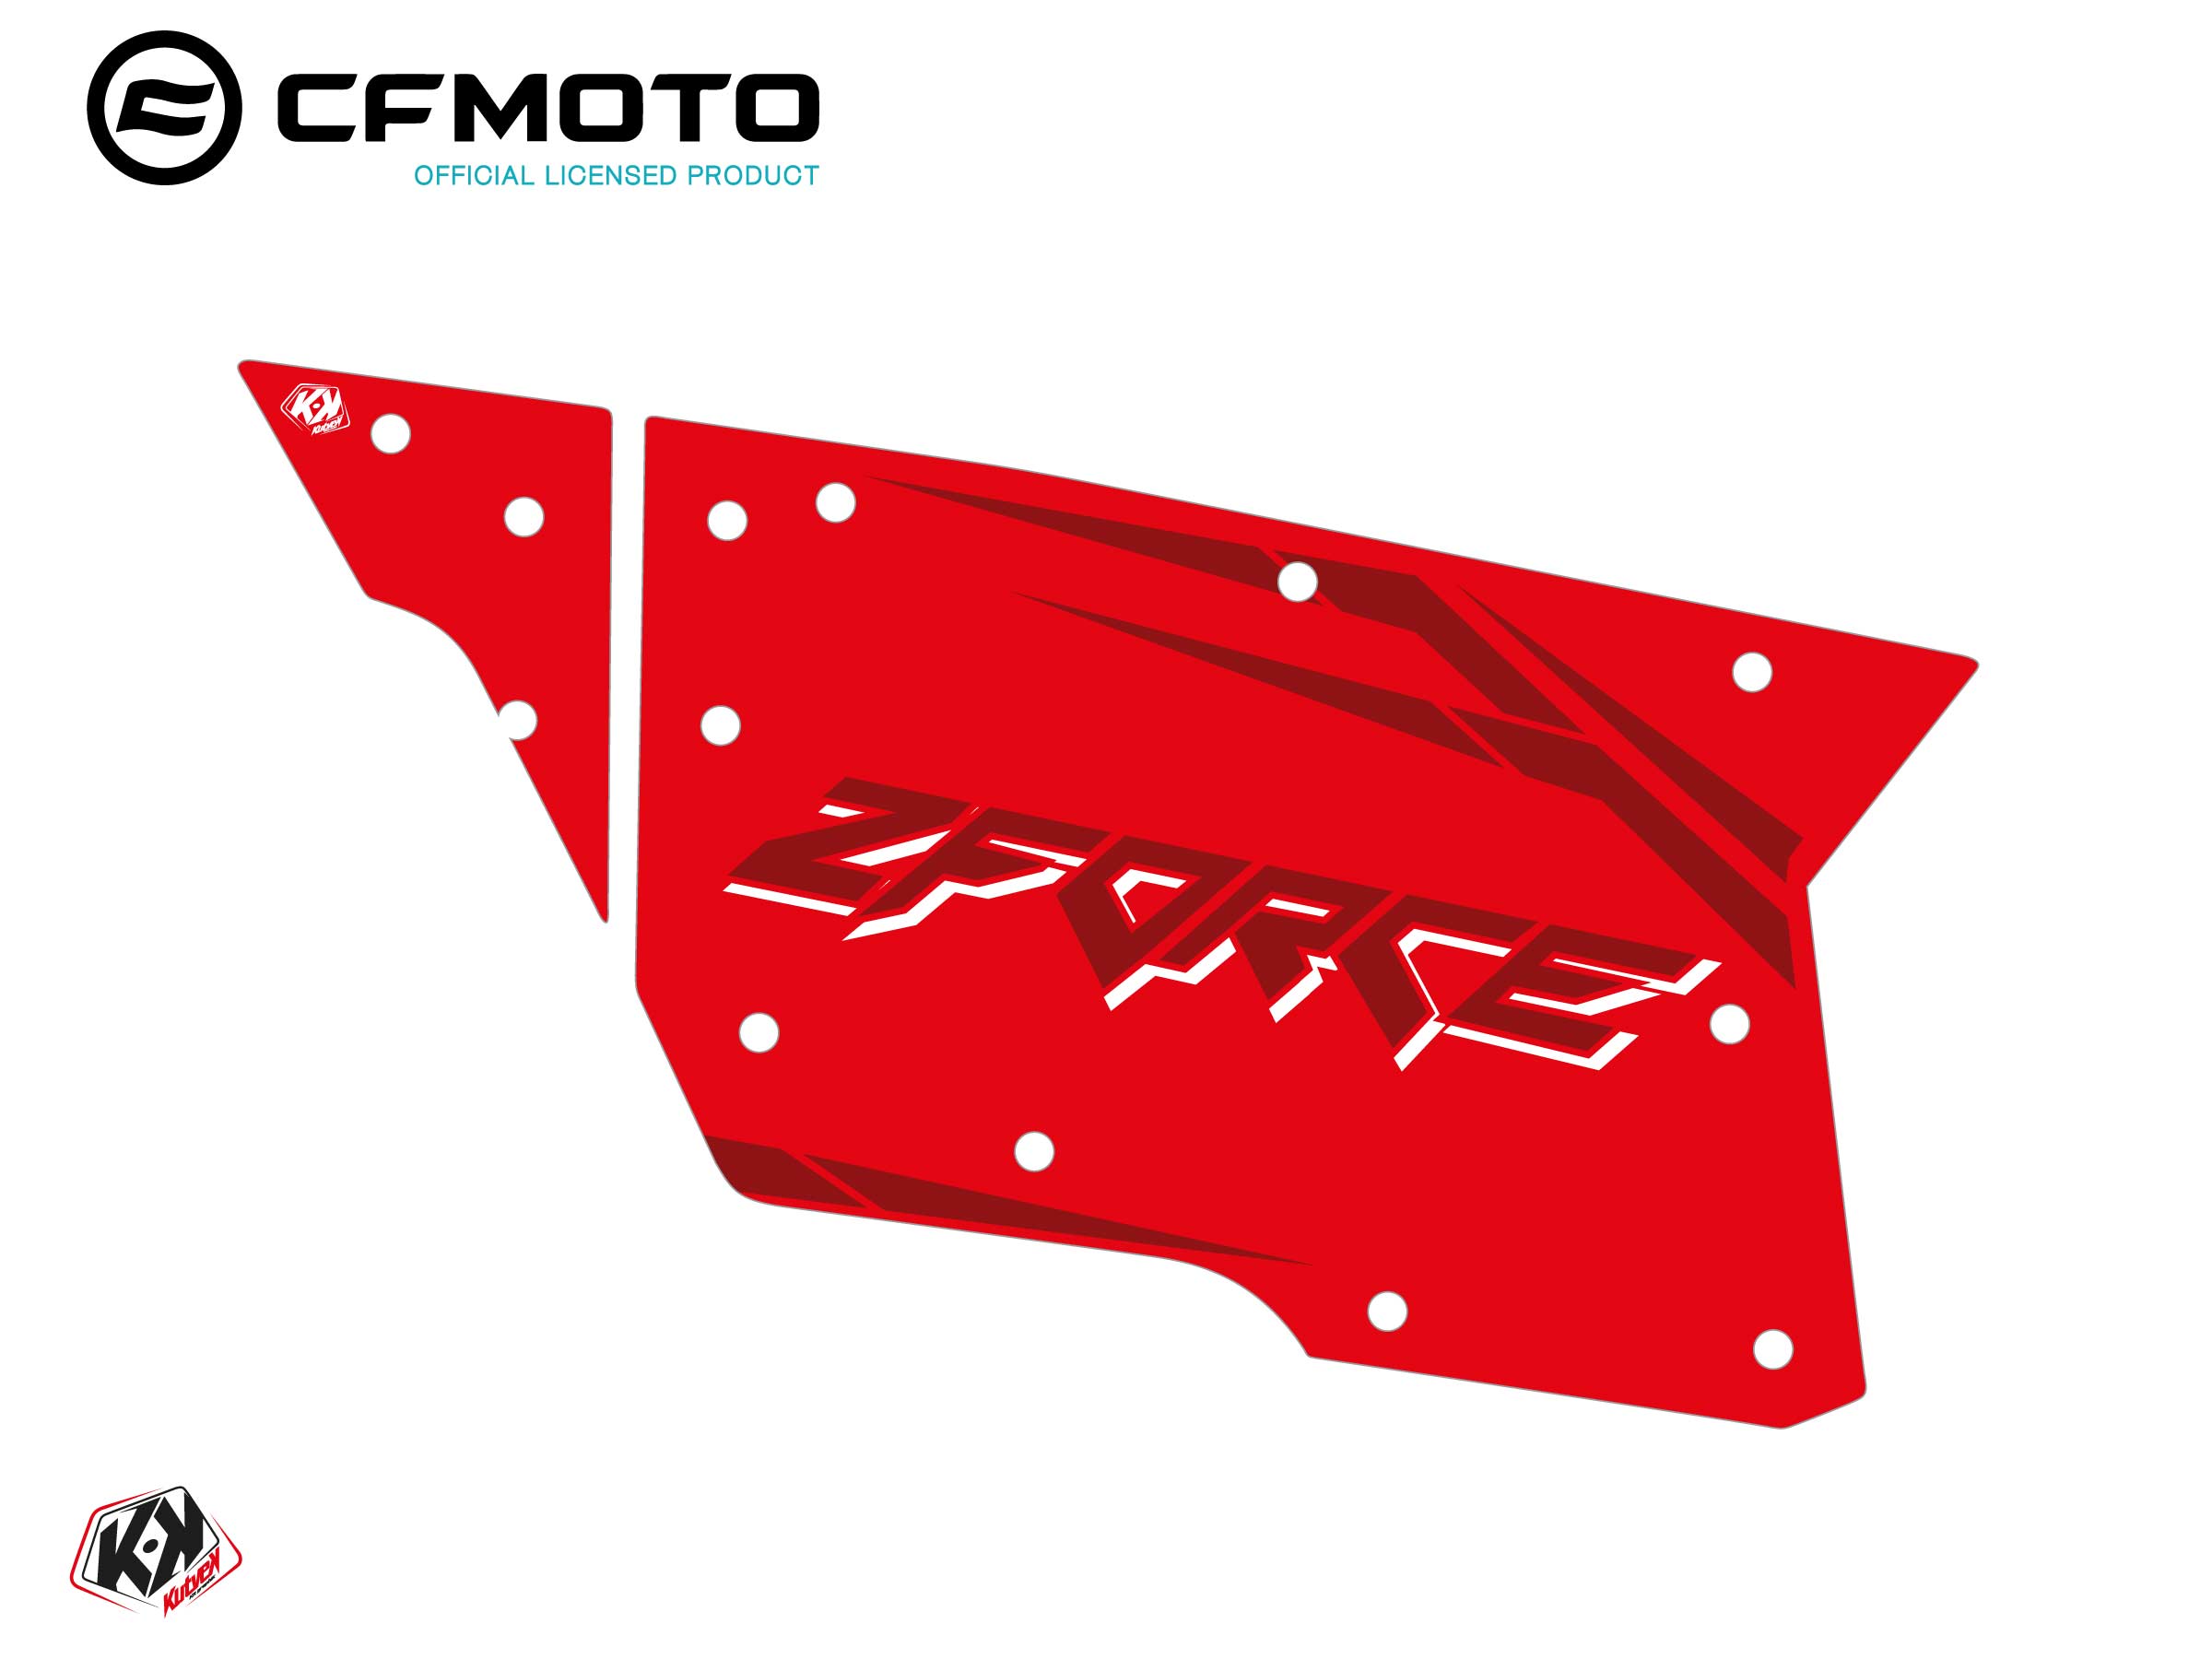 Graphic Kit Complete Doors PCZ8 CF Moto Zforce 500-550-800-1000 Red